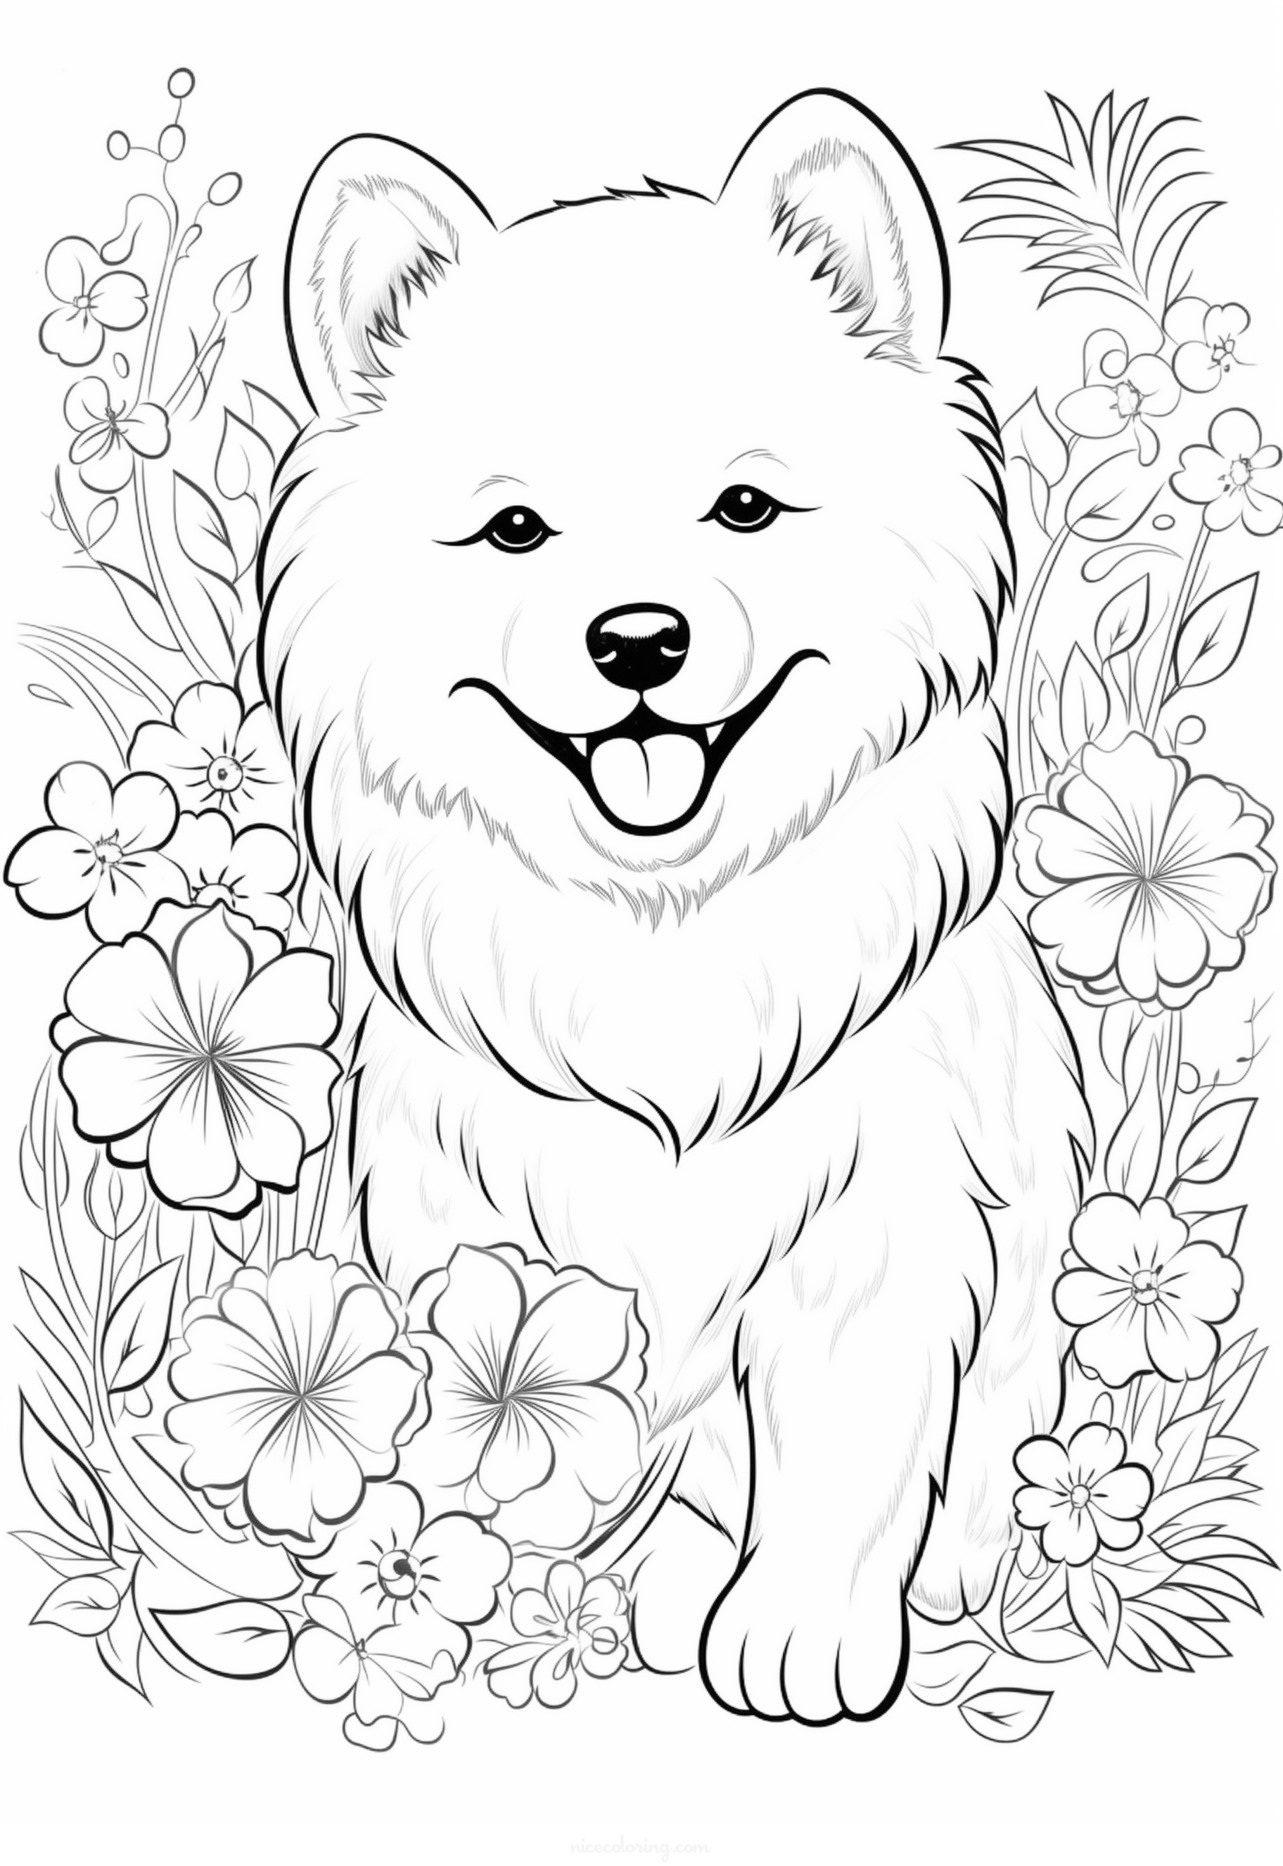 Dog happily sitting with a wagging tail coloring page